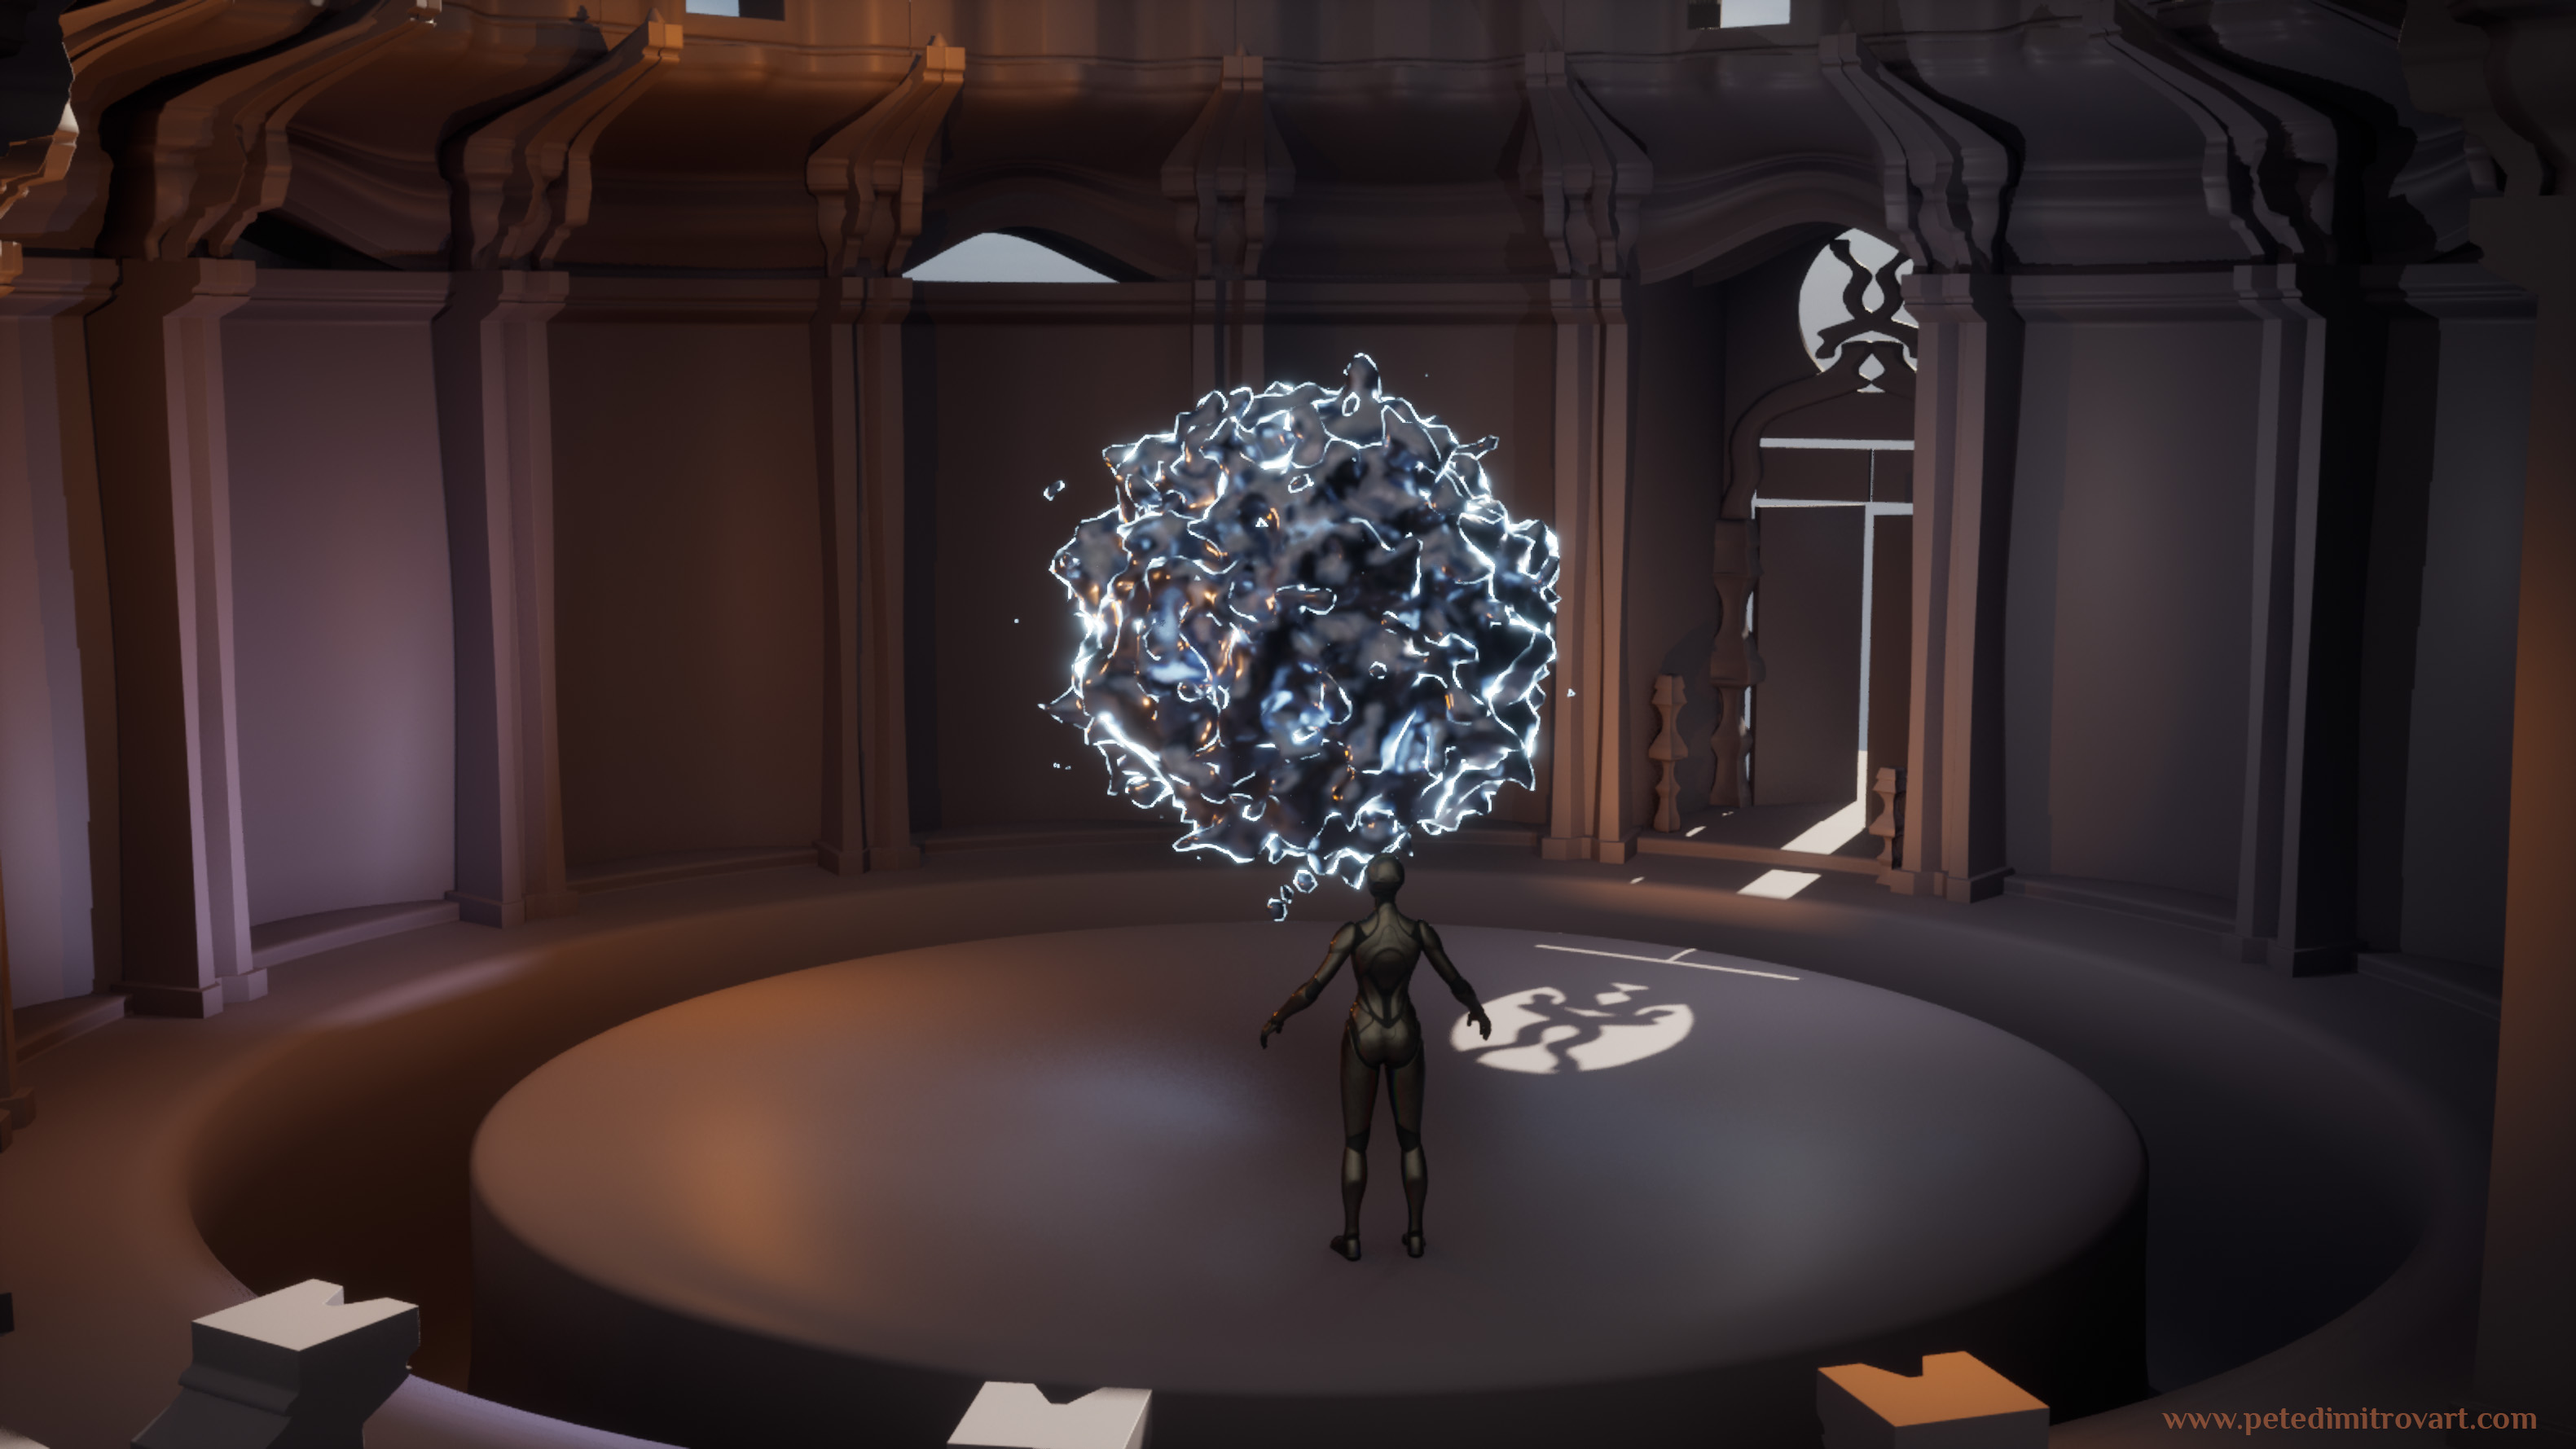 A circular room with placeholder gray materials and strong orange glow. There is a fuzzy, liquid metal orb in the very middle. Around are pillars with ornate details on their tops. The walls have slight gaps for sci-fi-esque windows. There is a door that is slightly ajar and sunlight comes out of it. Unreal 5 screenshot